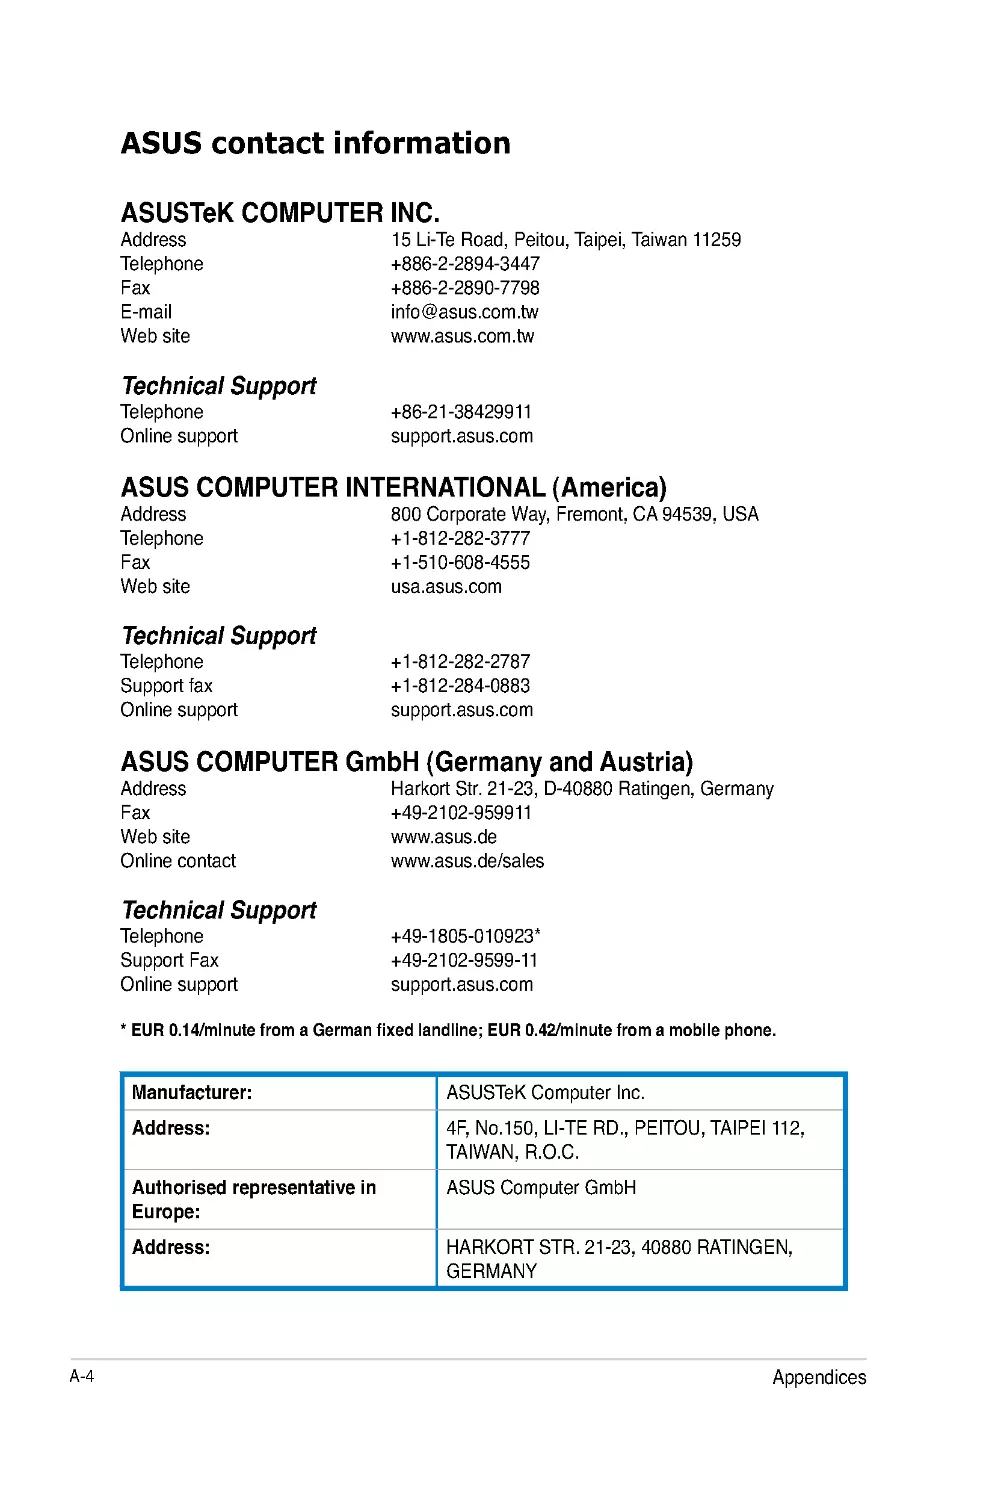 ASUS contact information